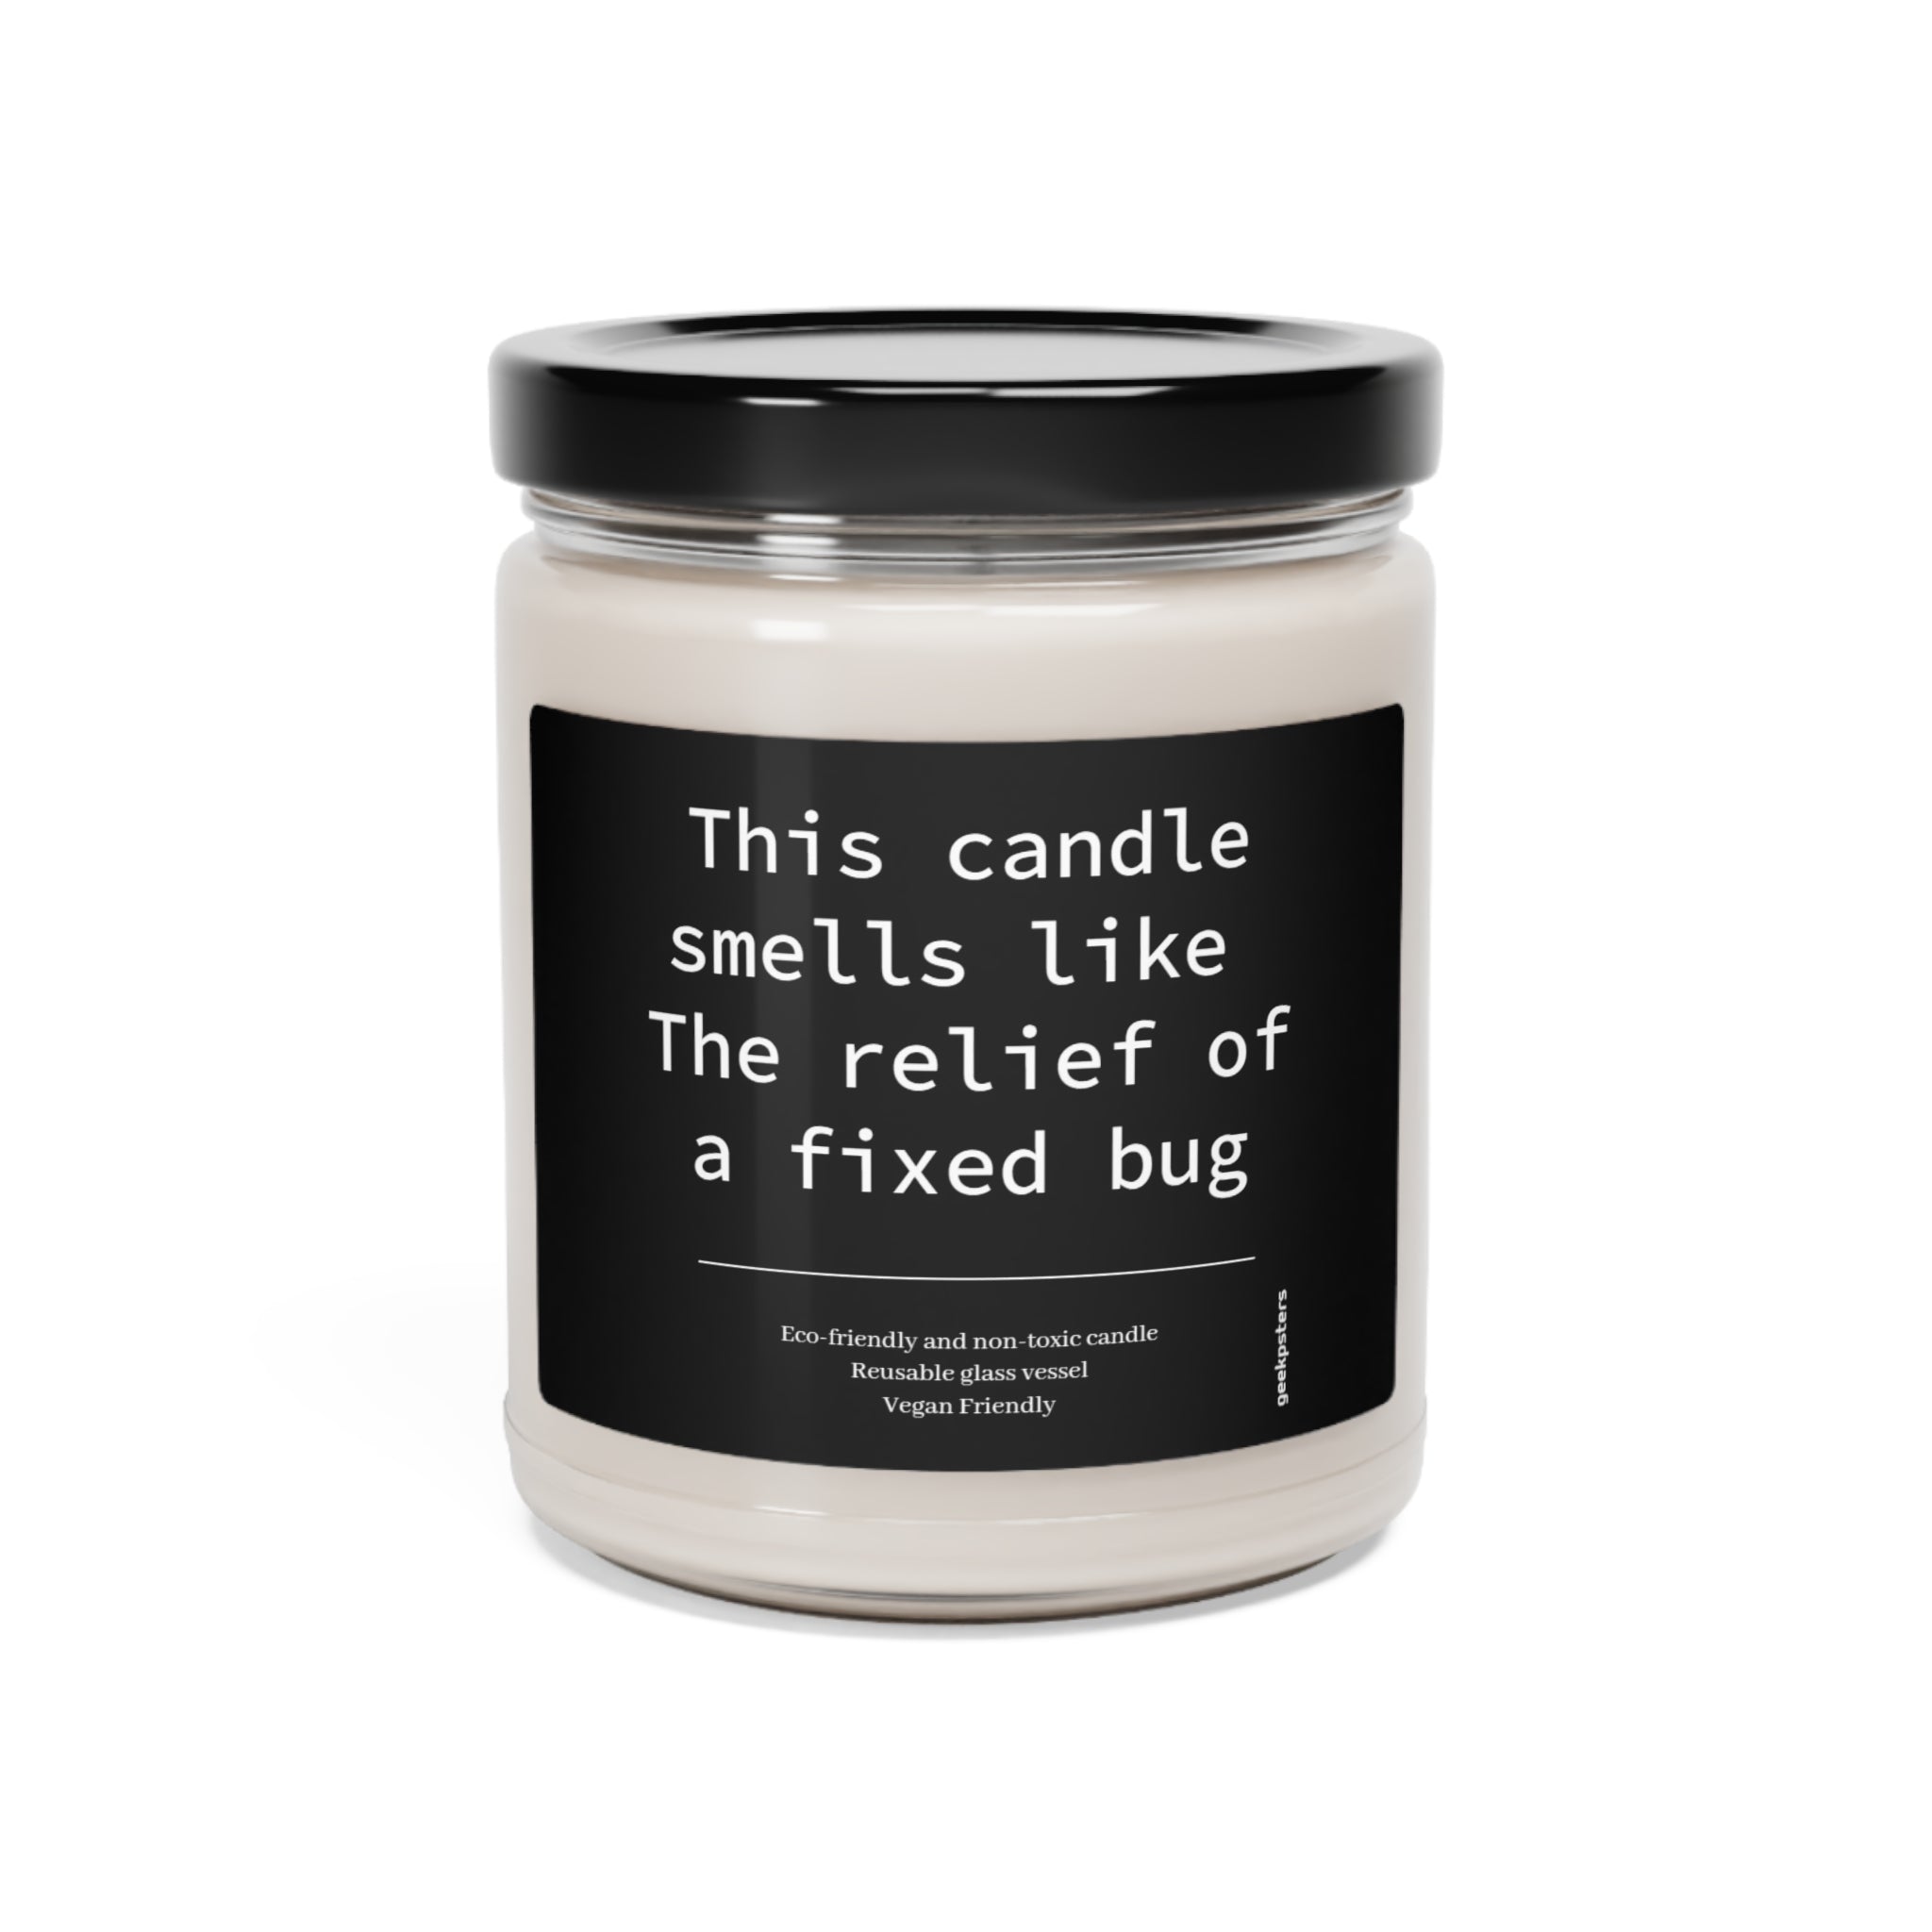 A This Candle Smells Like The Relief of a Fixed Bug soy candle in a clear jar with a label that reads "this candle smells like the relief of a fixed bug," indicating it's eco-friendly and vegan.